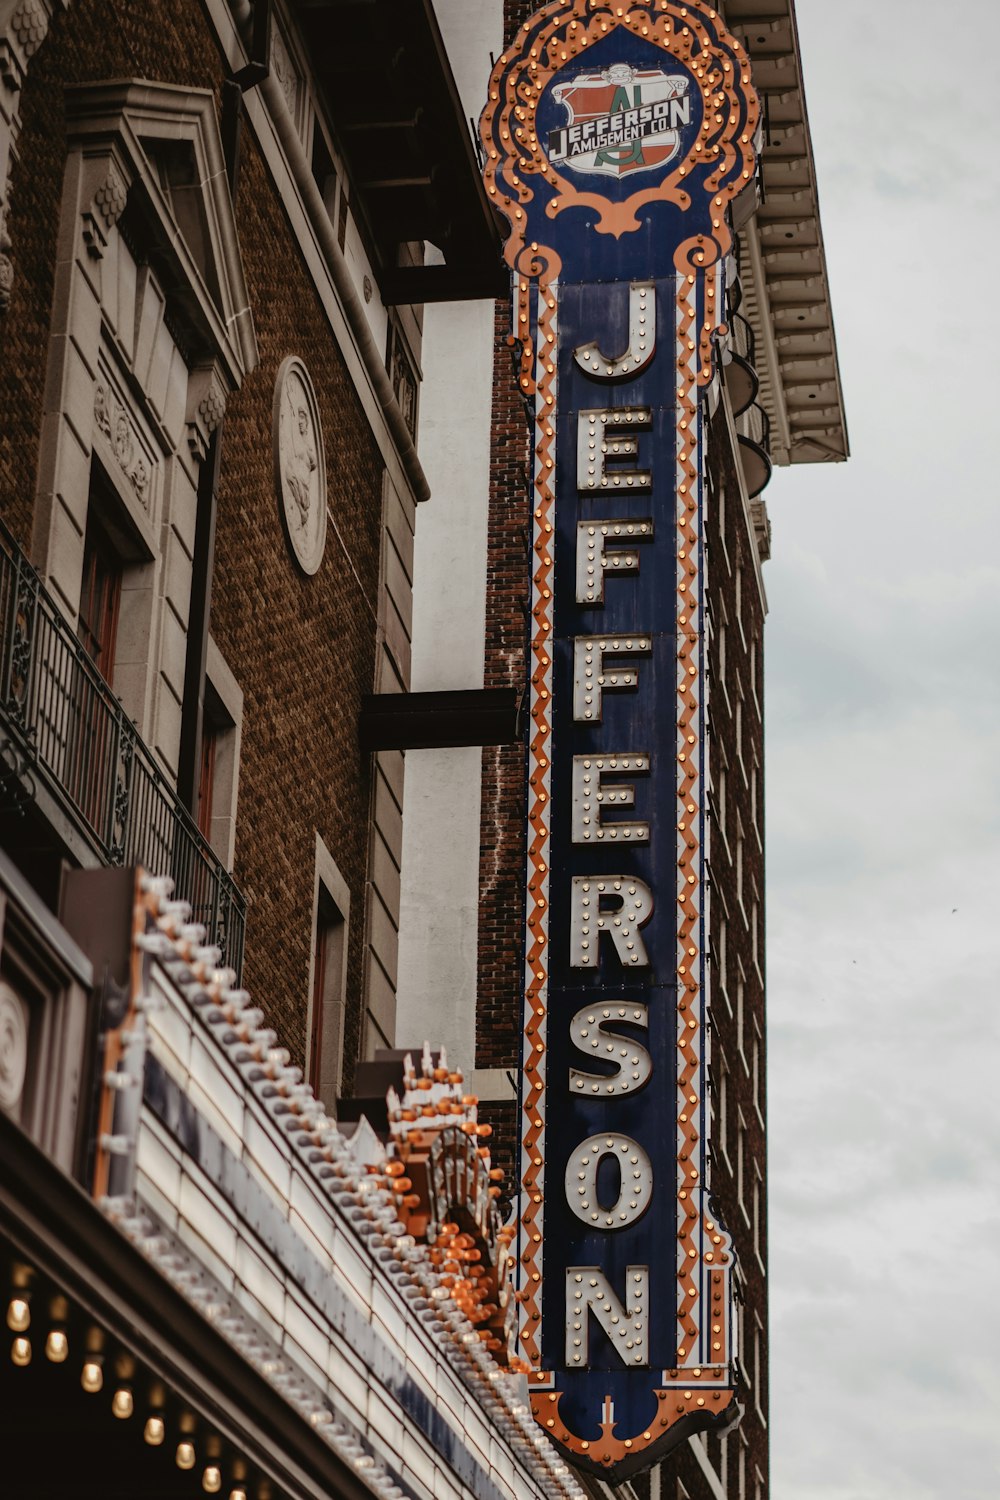 white and black Jefferson light signage during daytime